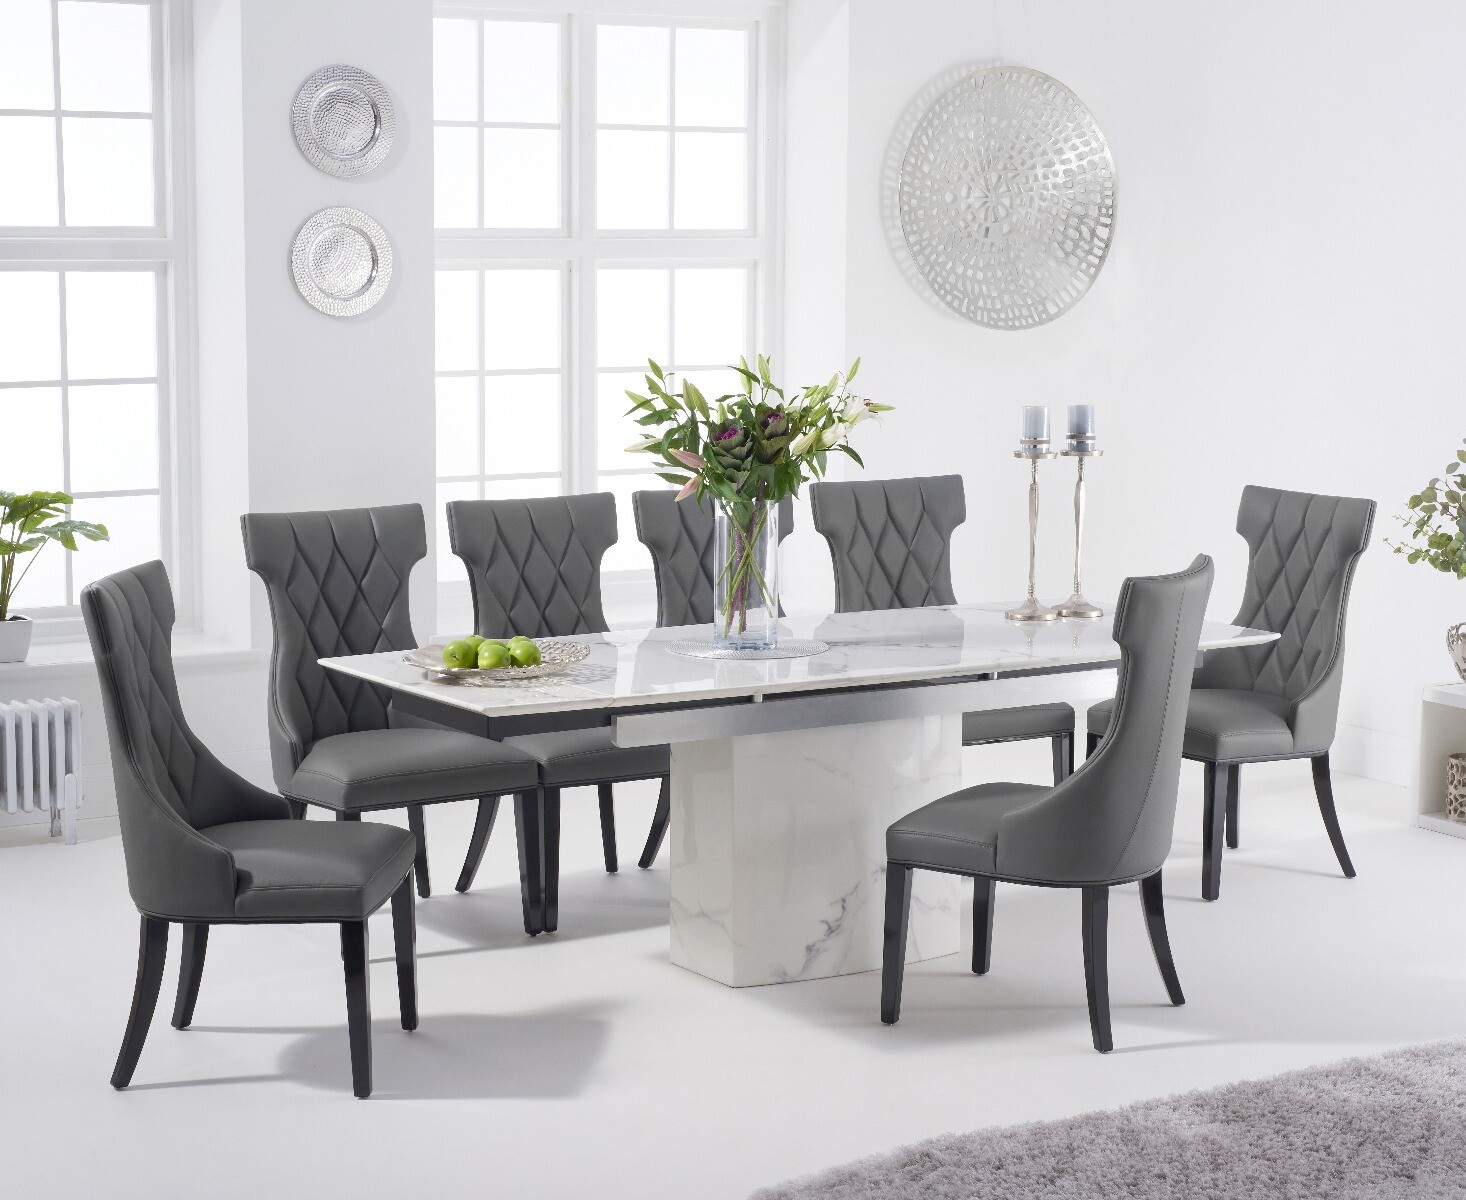 Extending Savona 160cm White Marble Dining Table With 10 Grey Sophia Chairs